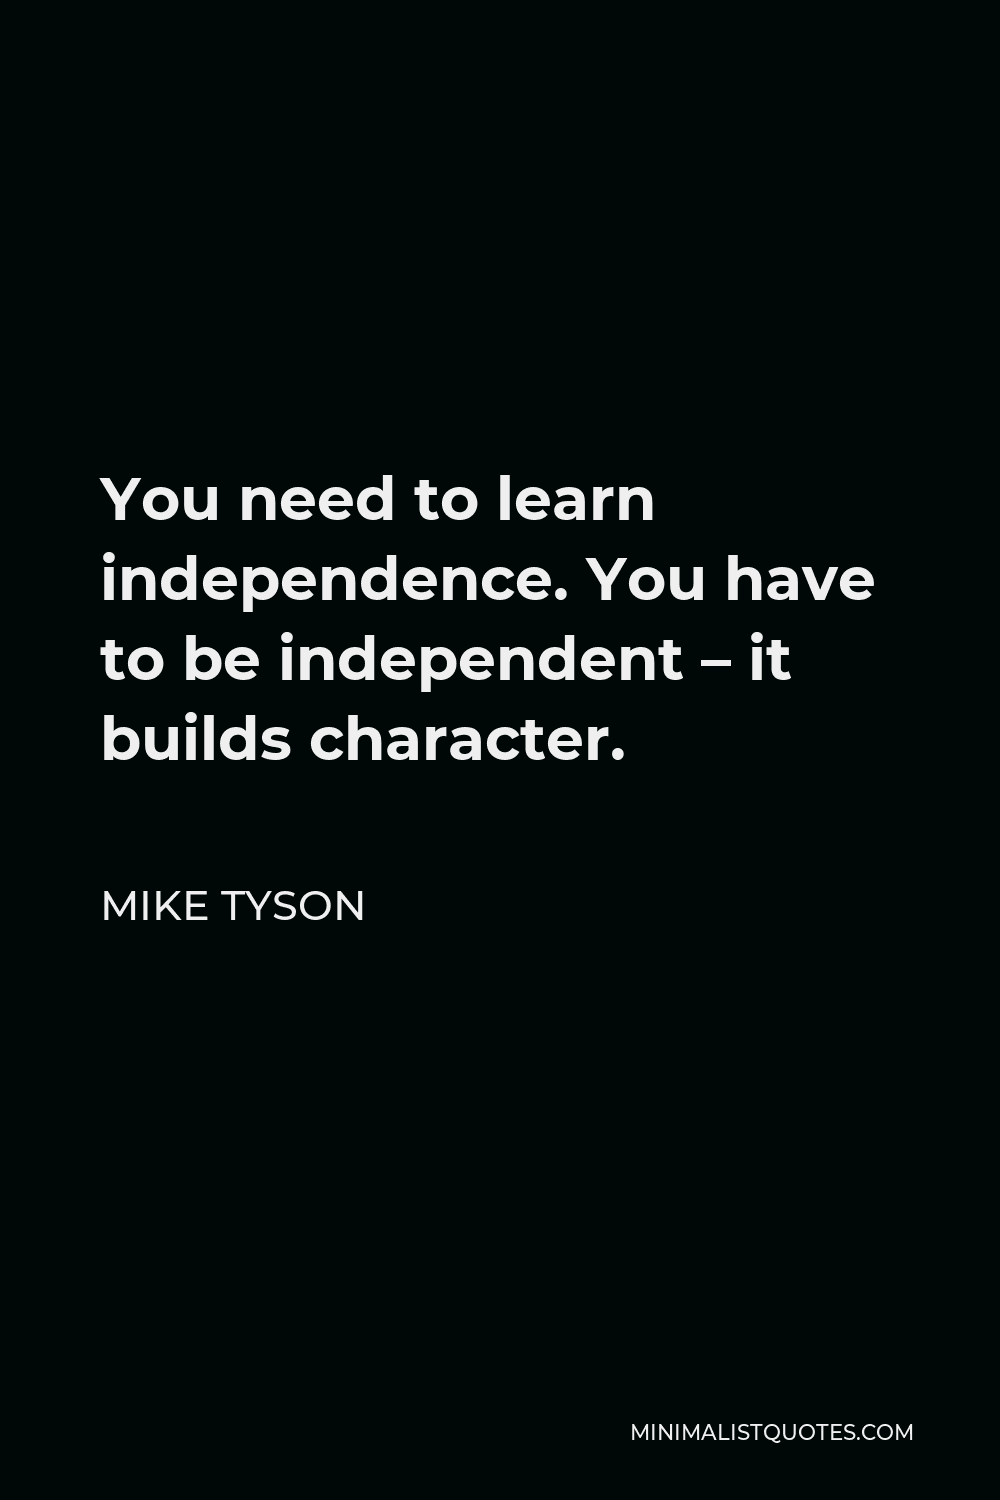 Mike Tyson Quote - You need to learn independence. You have to be independent – it builds character.